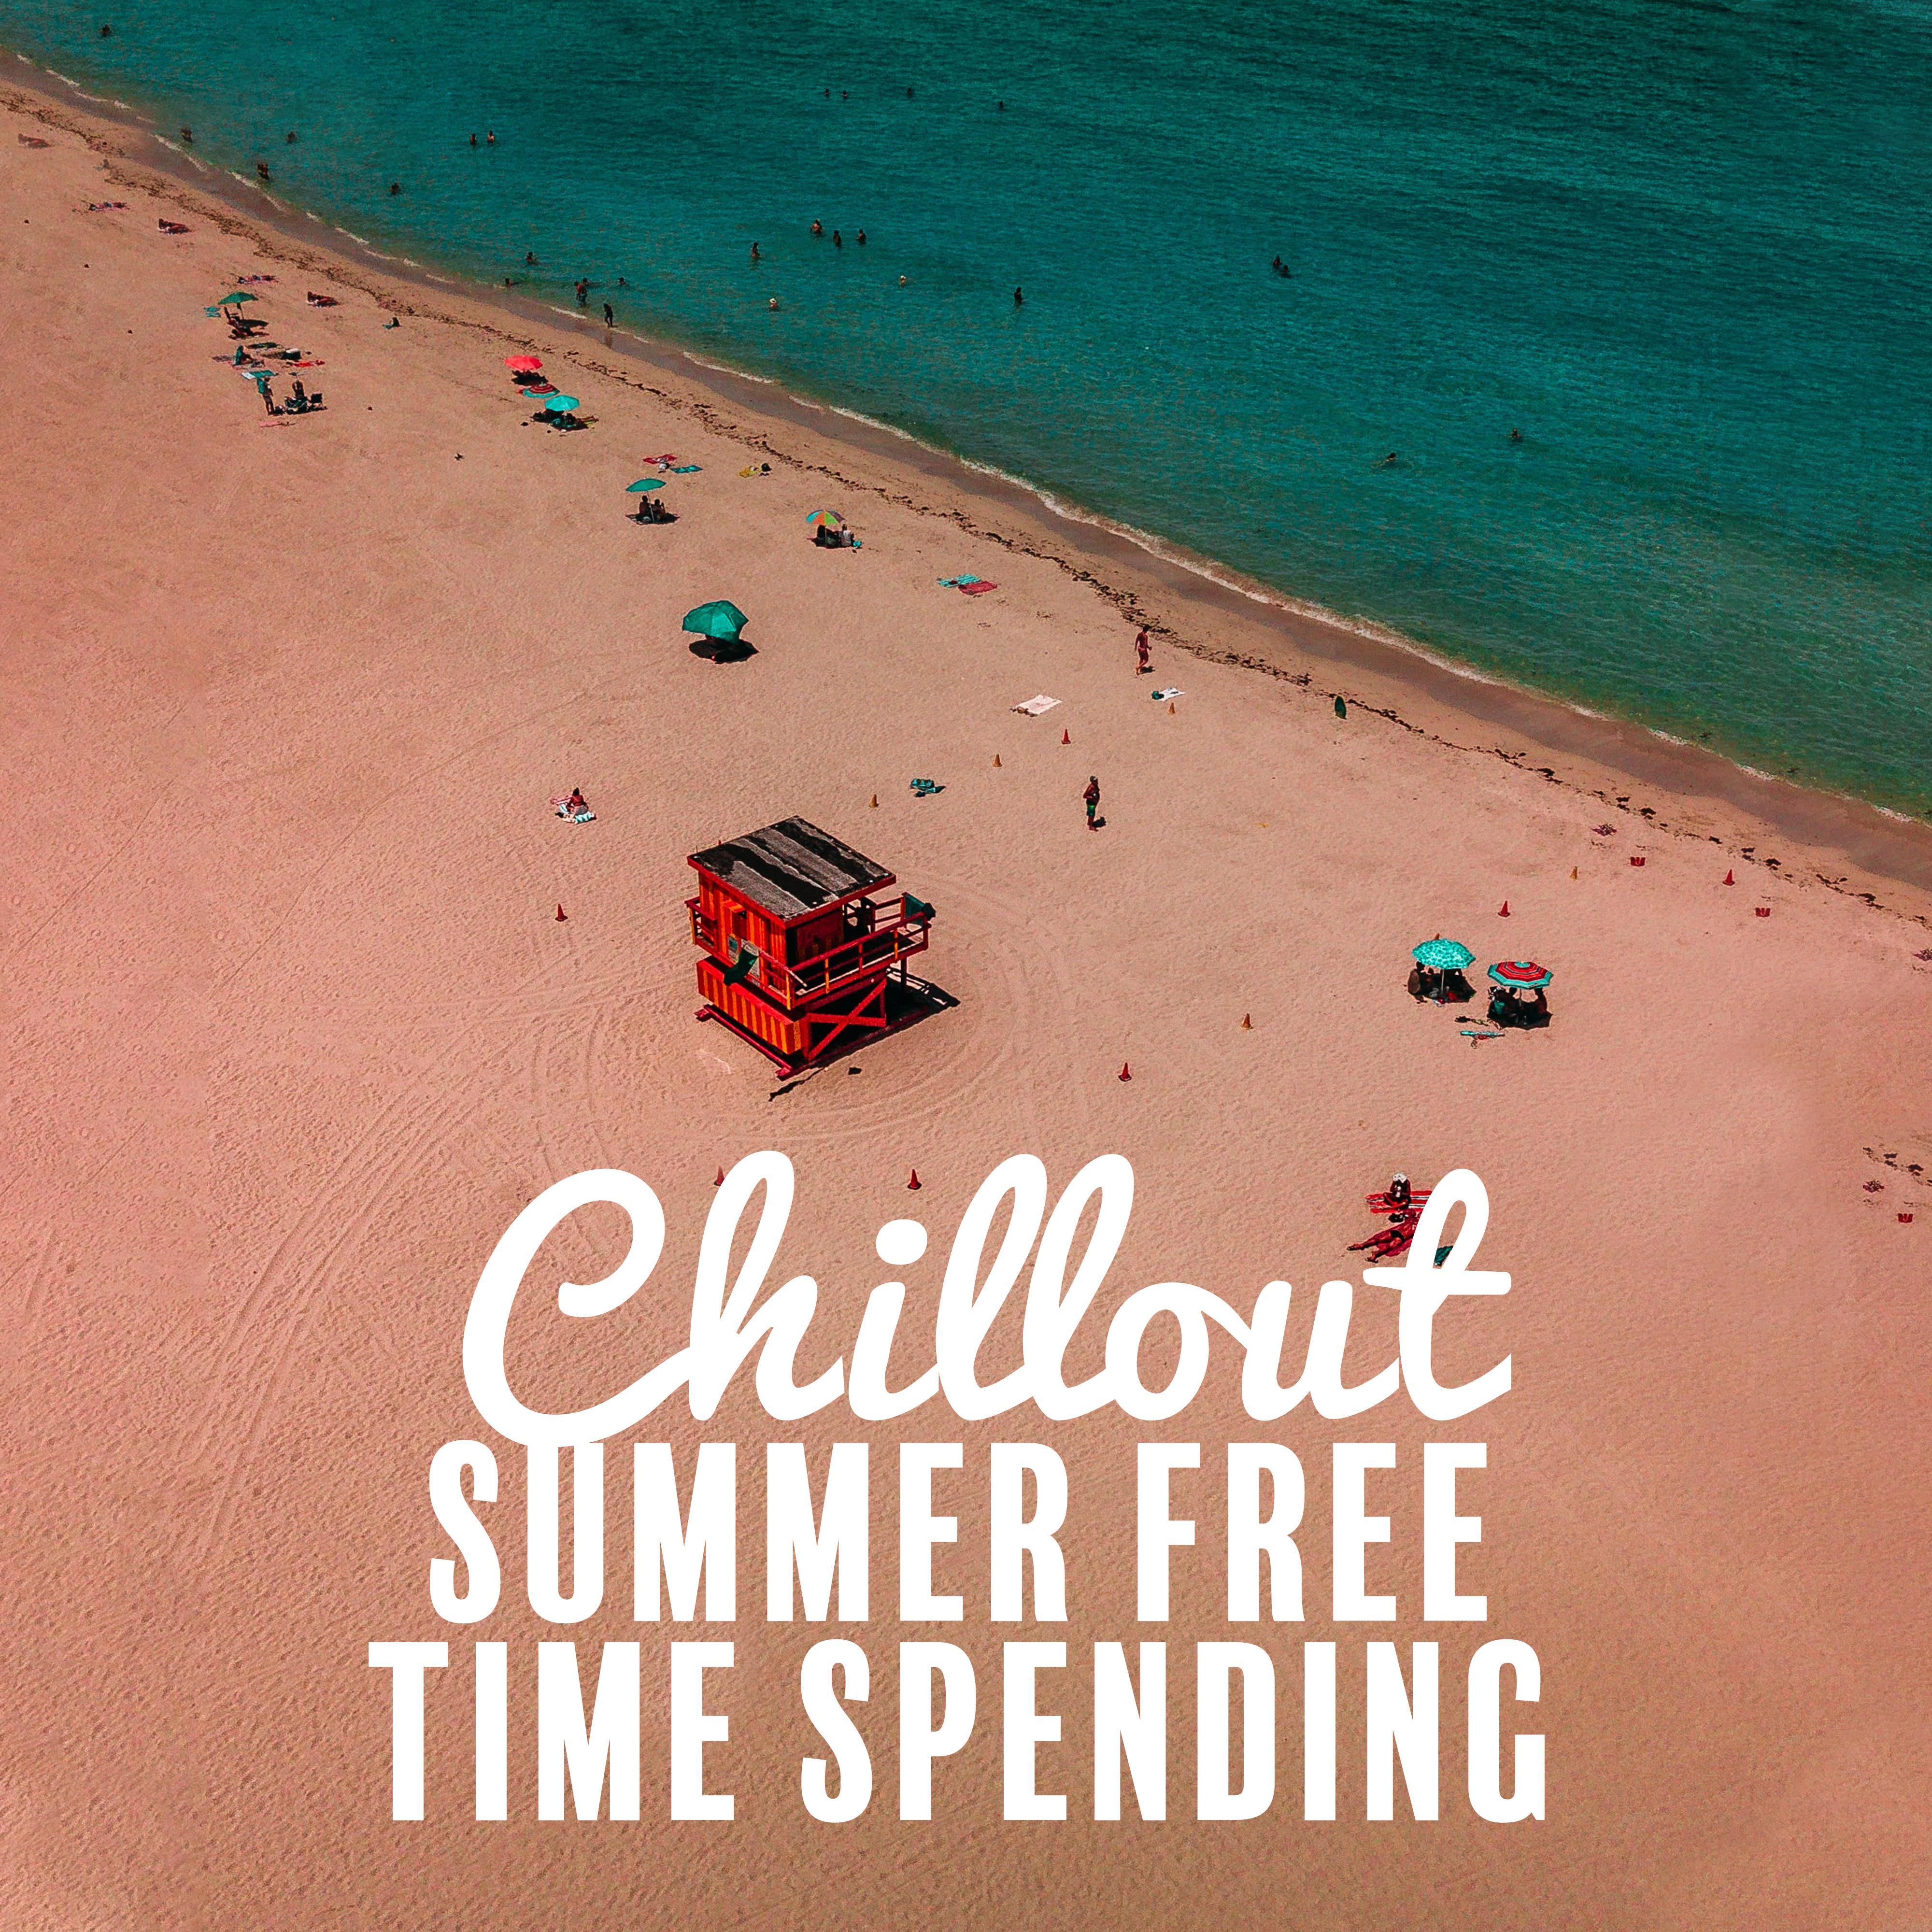 Chillout Summer Free Time Spending: 15 Electronic Songs for Relaxing on the Beach or at Poolside